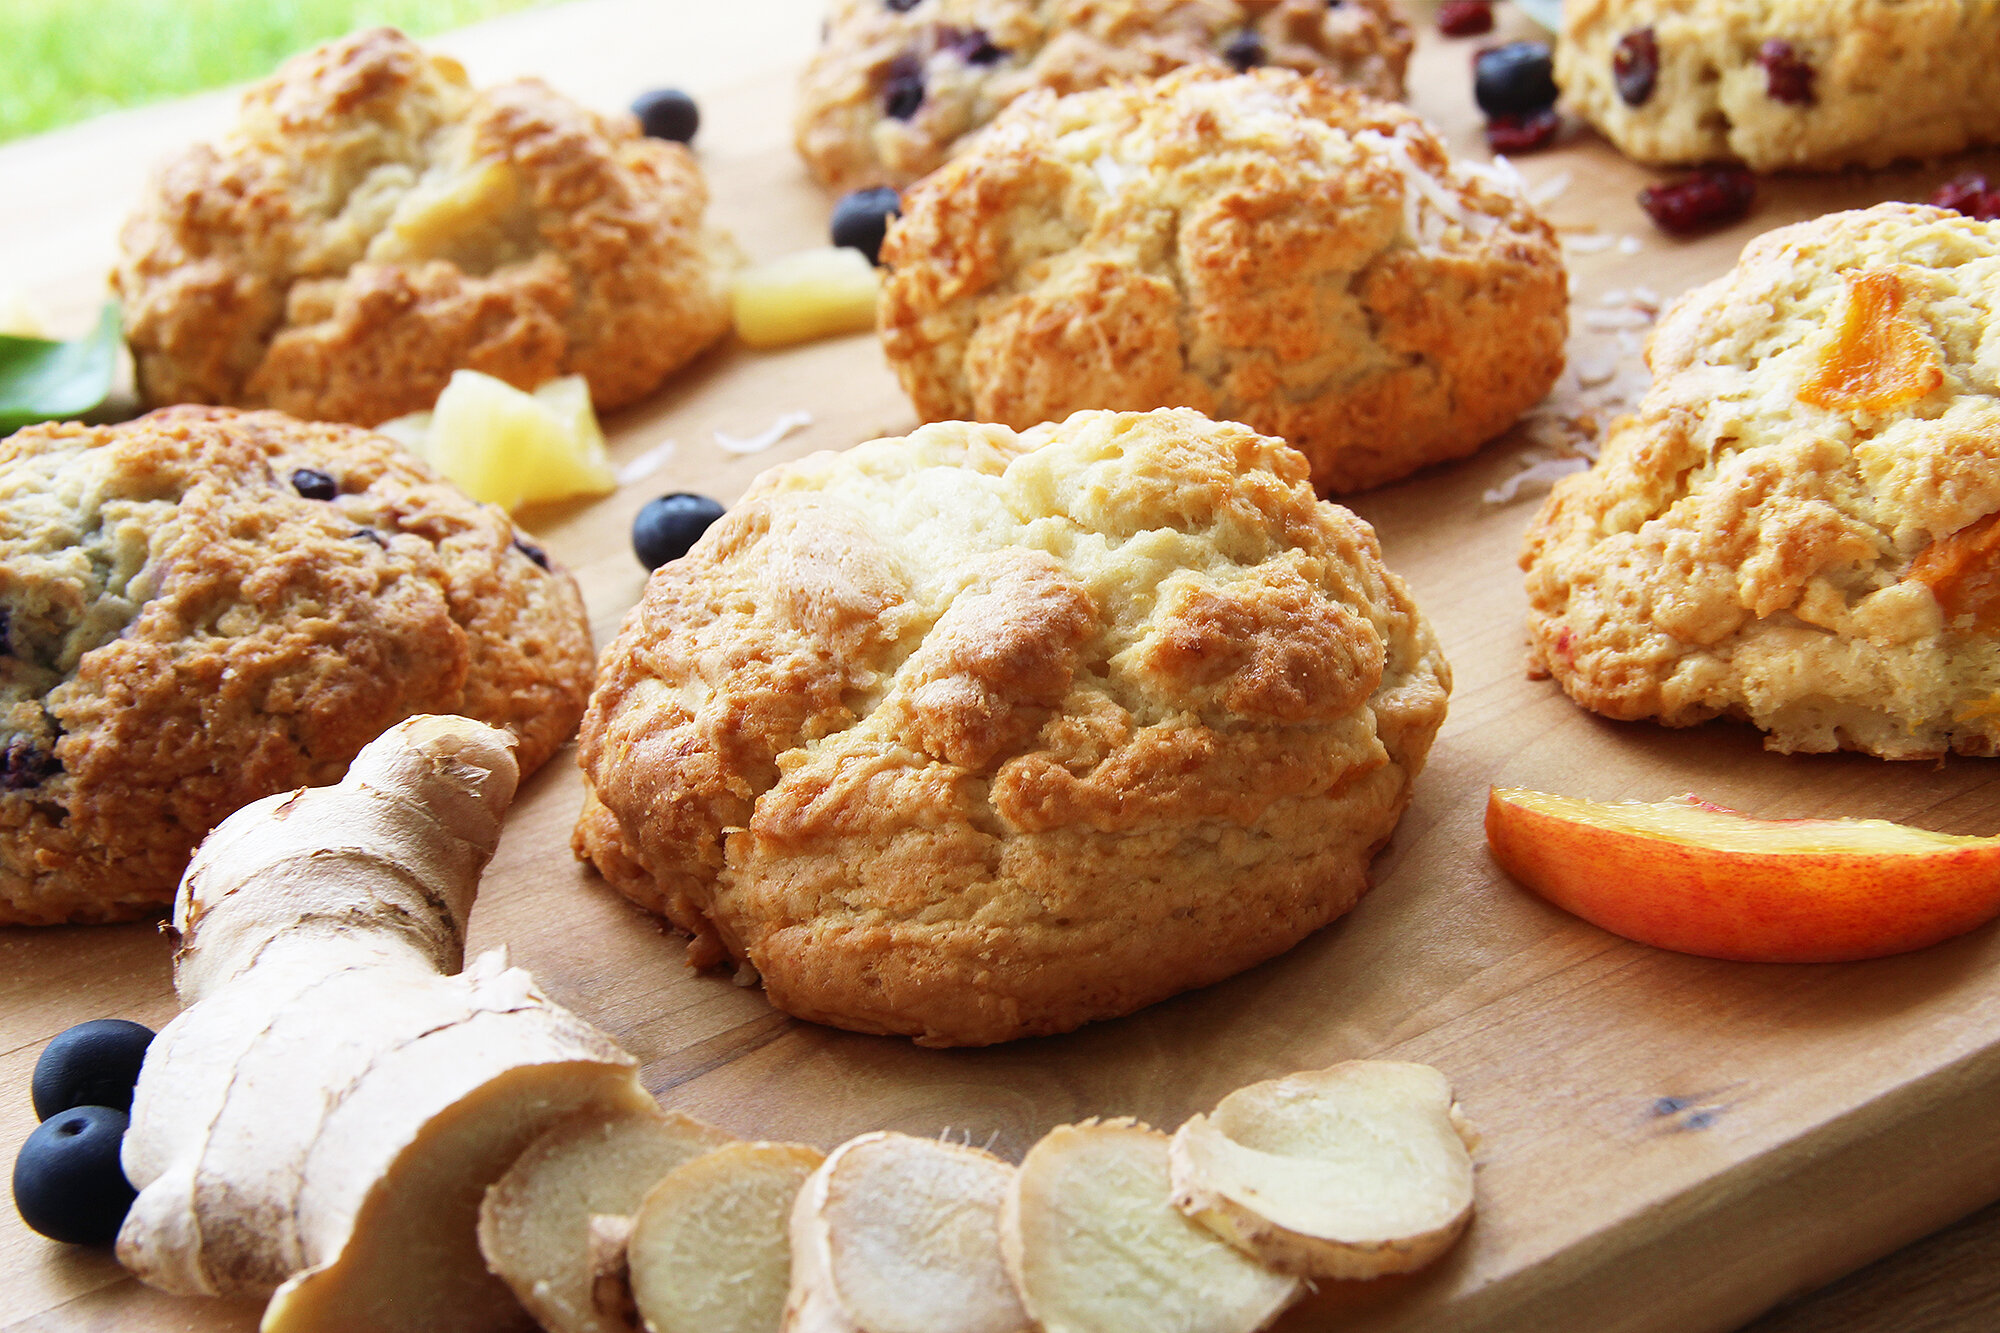 group-of-scones-with-ginger-peaches-blueberries-and-pineapples.jpg